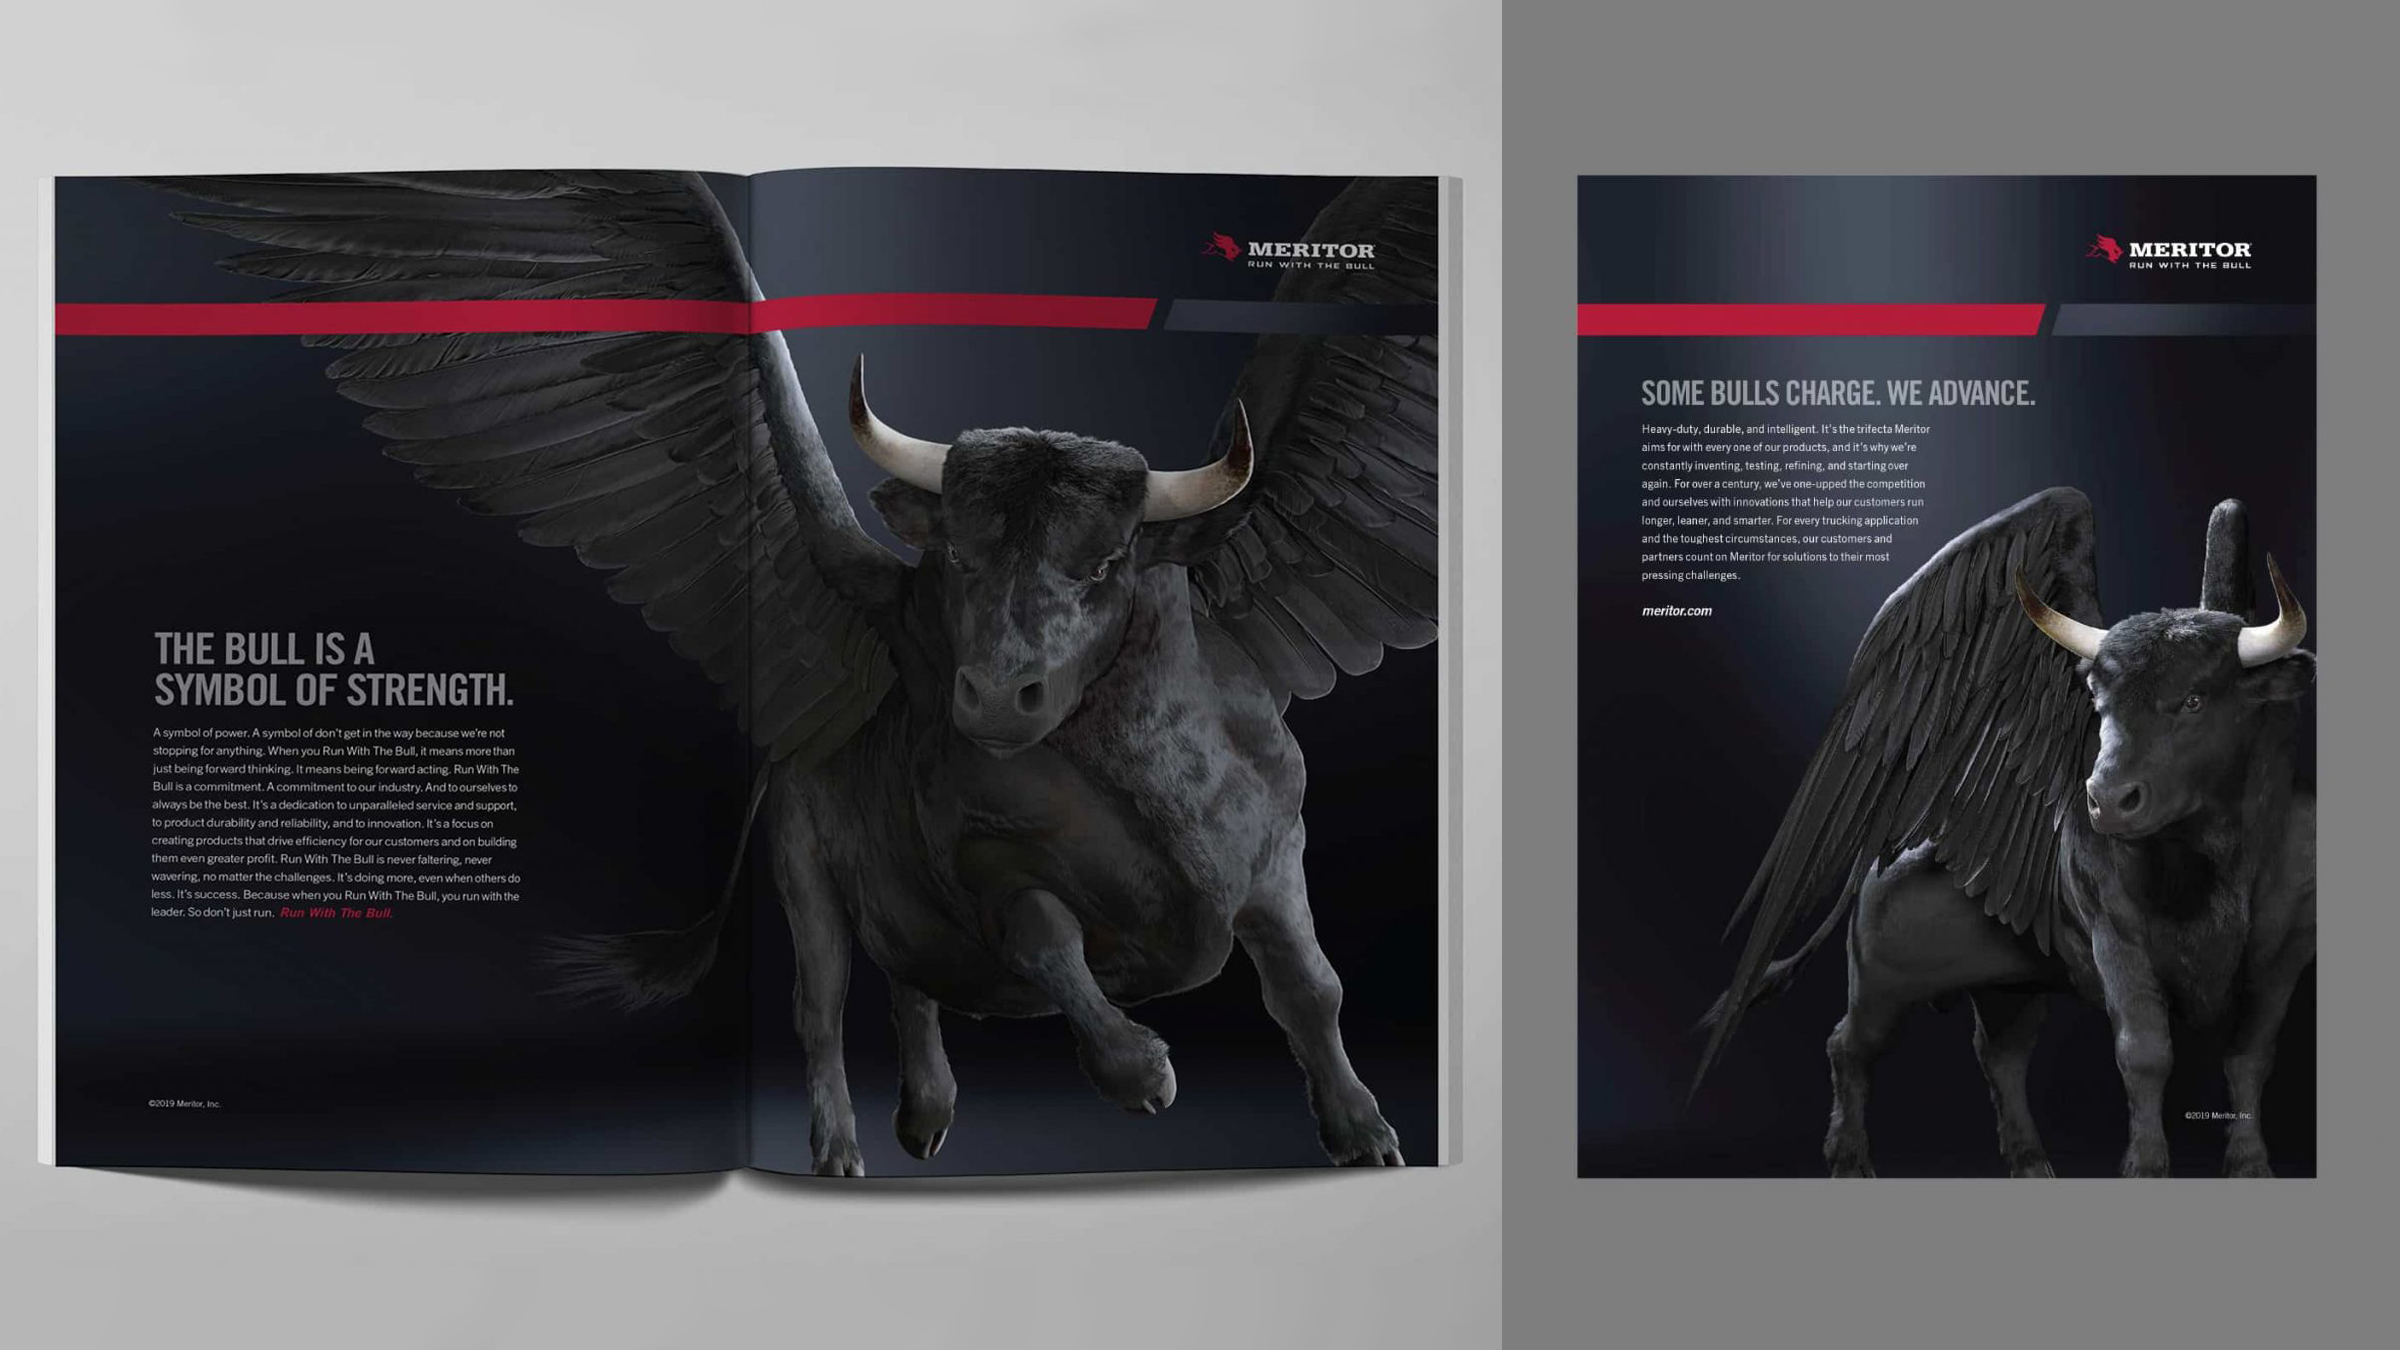 Meritor Run with the Bull campaign posters and magazine ad